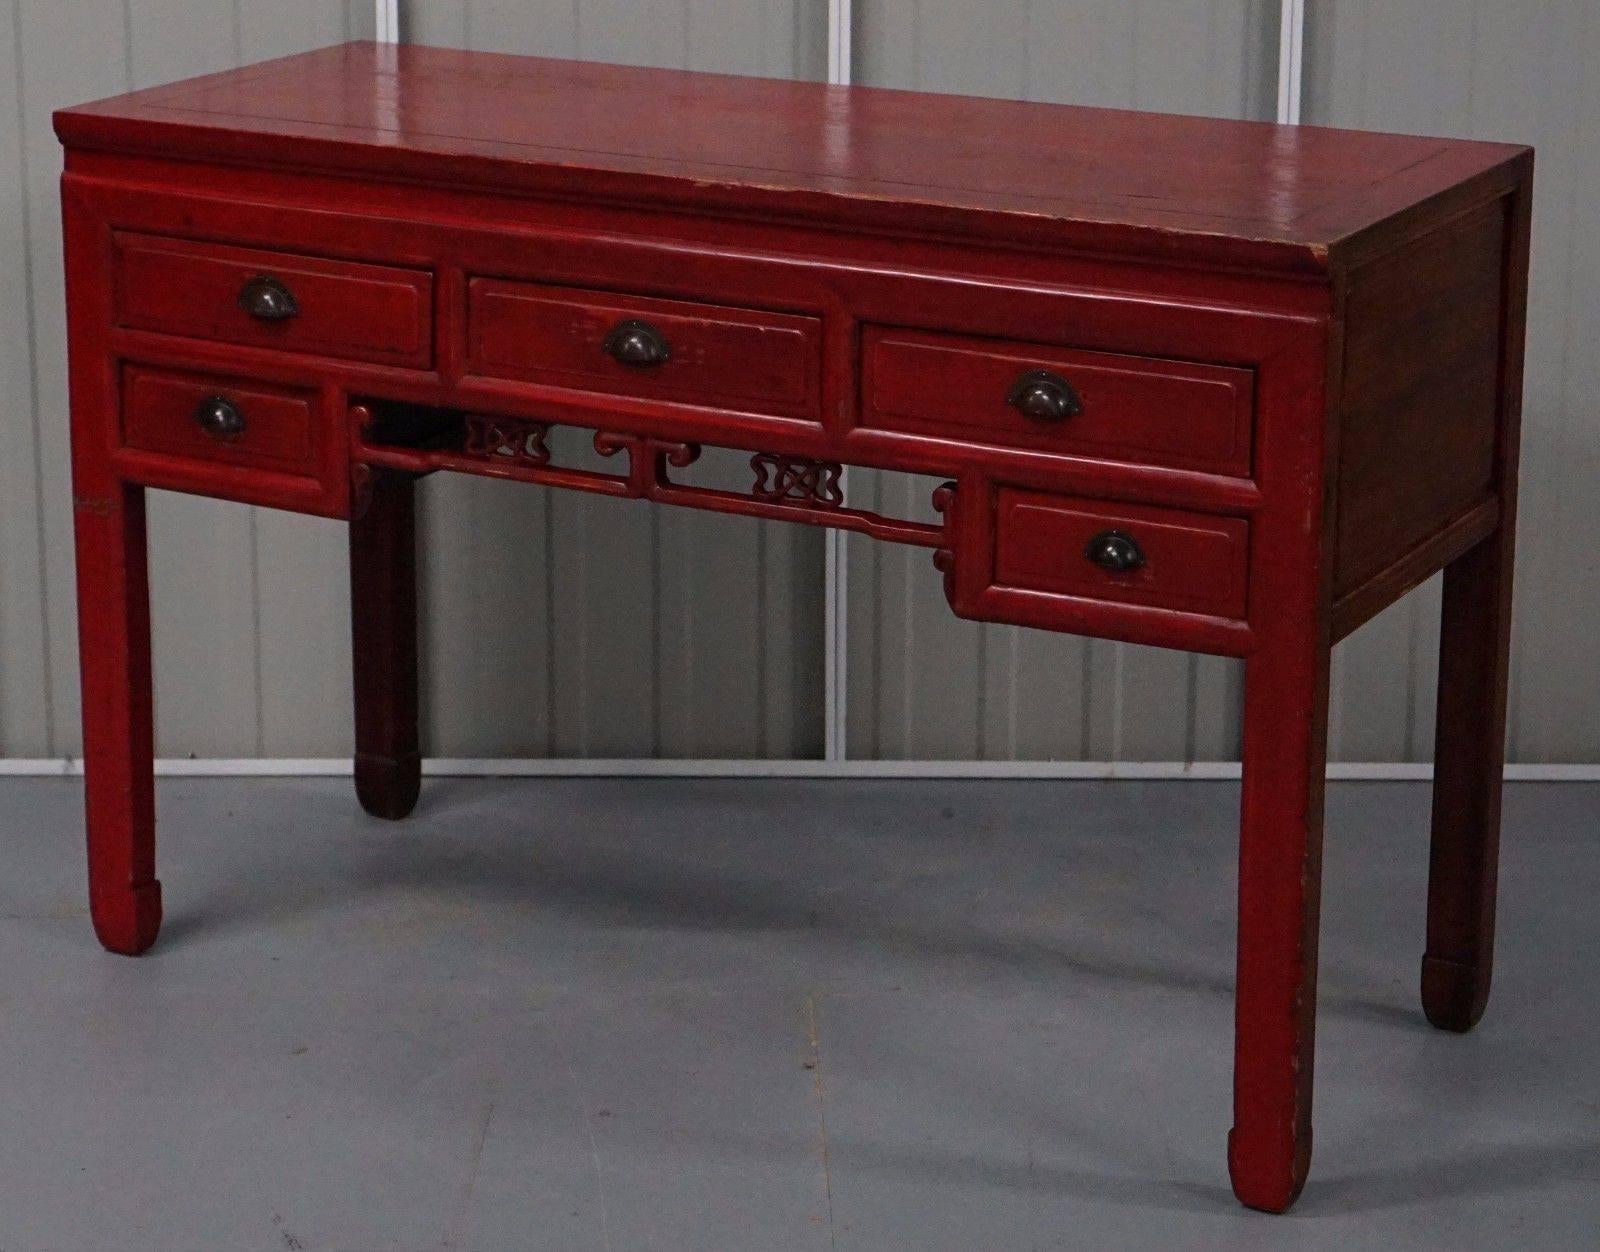 We are delighted to offer for sale this very nice Chinese vintage red lacquered Rosewood desk or dressing table

A very good looking and functional vintage piece that looks amazing from any angle

We have cleaned waxed and polished it, there is